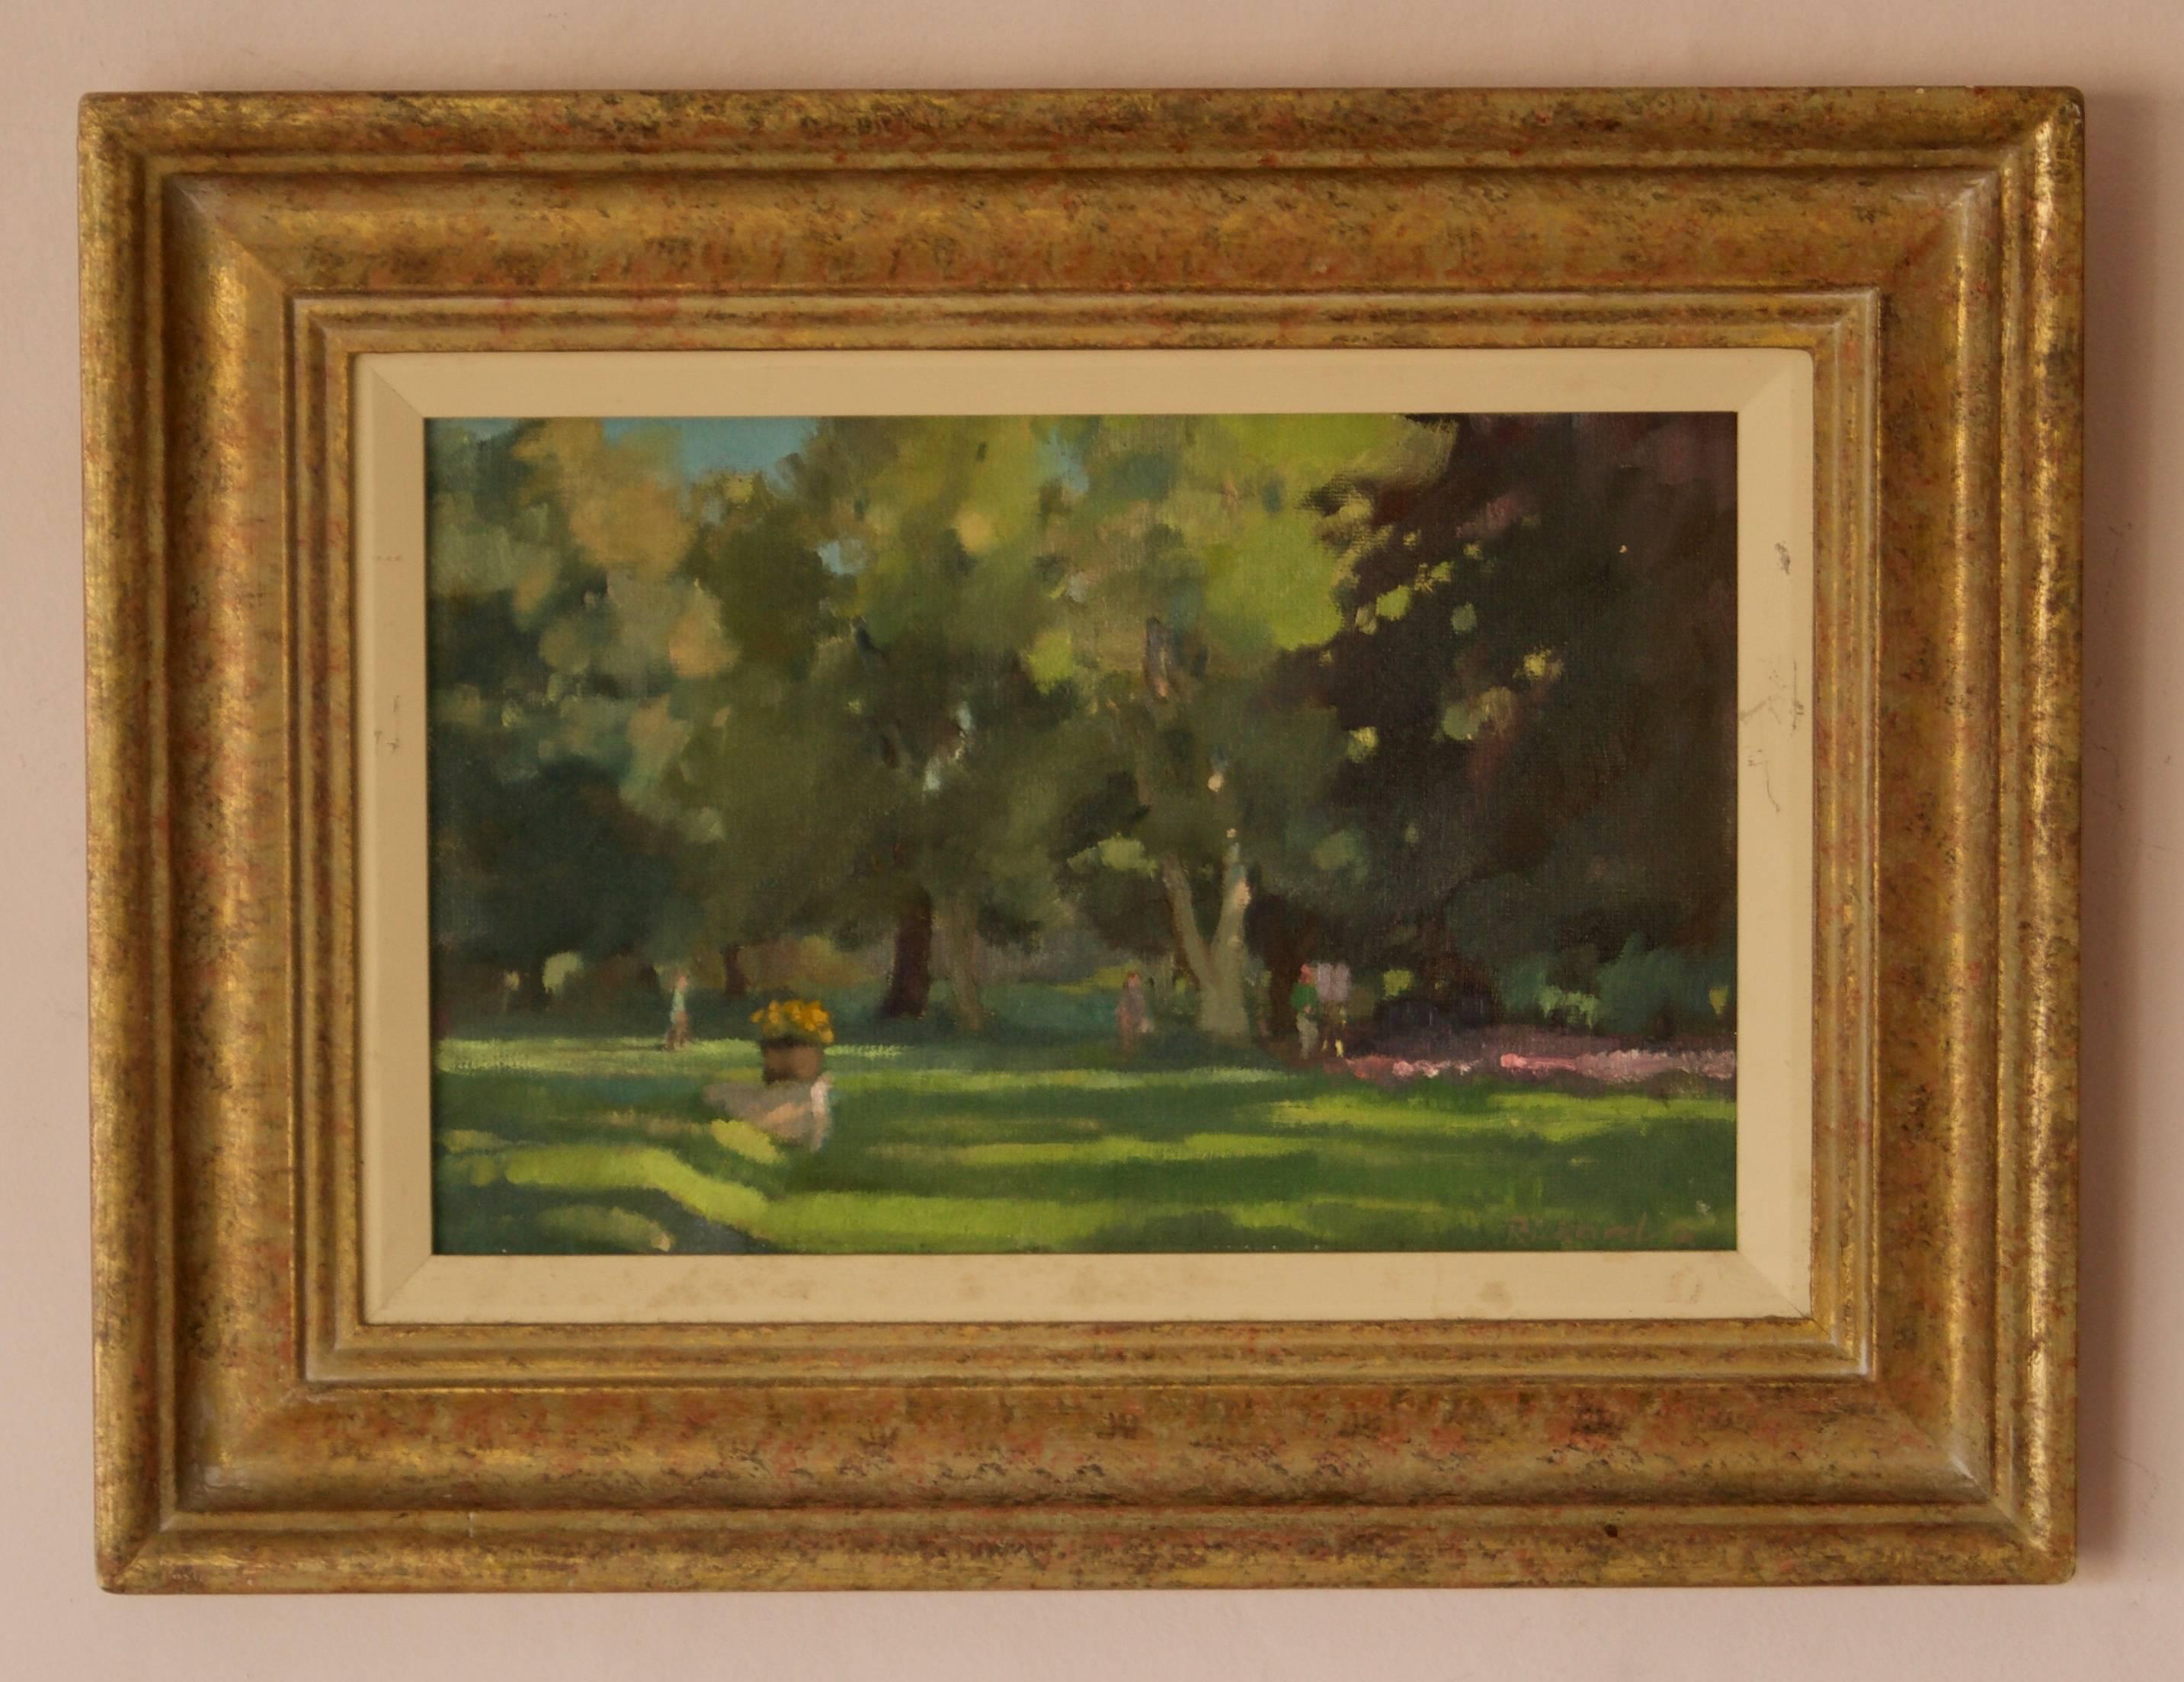 Summer Park 2 - Mid 20th Century Impressionist Landscape Oil by Rickards - Painting by Anthony Rickards